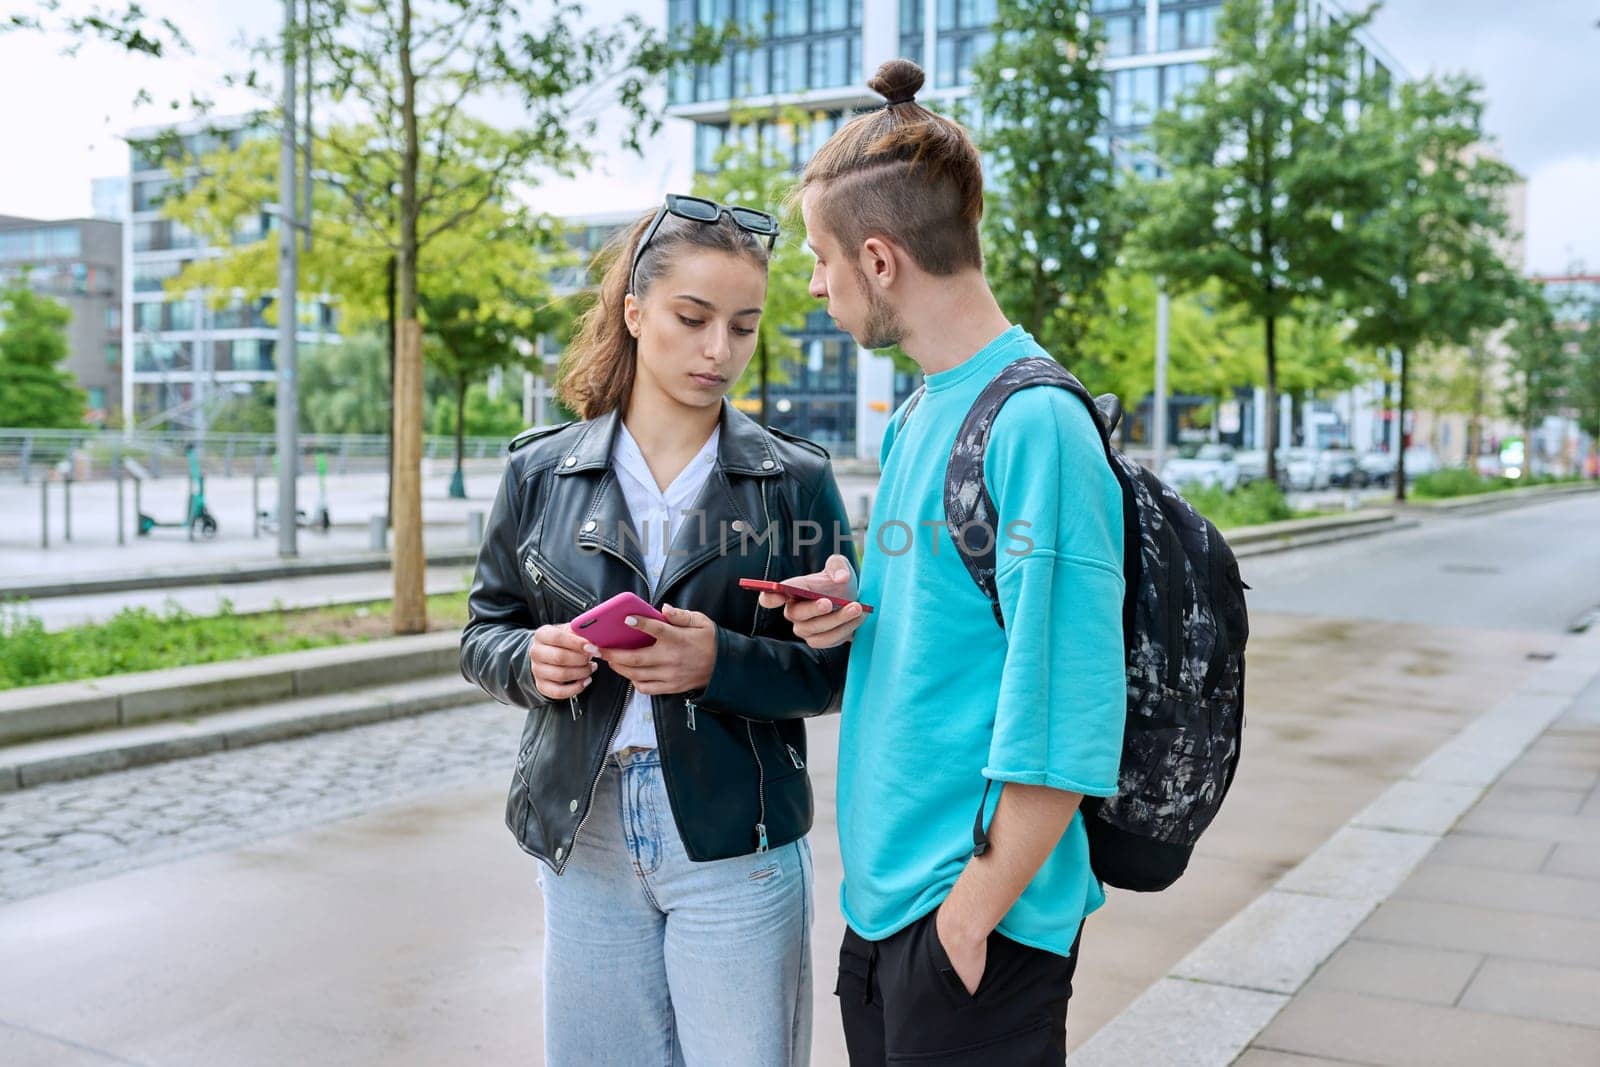 Teen friends guy and girl standing together holding smartphones looking at screen using mobile phones outdoor on city street. Internet digital technology applications for leisure study communication